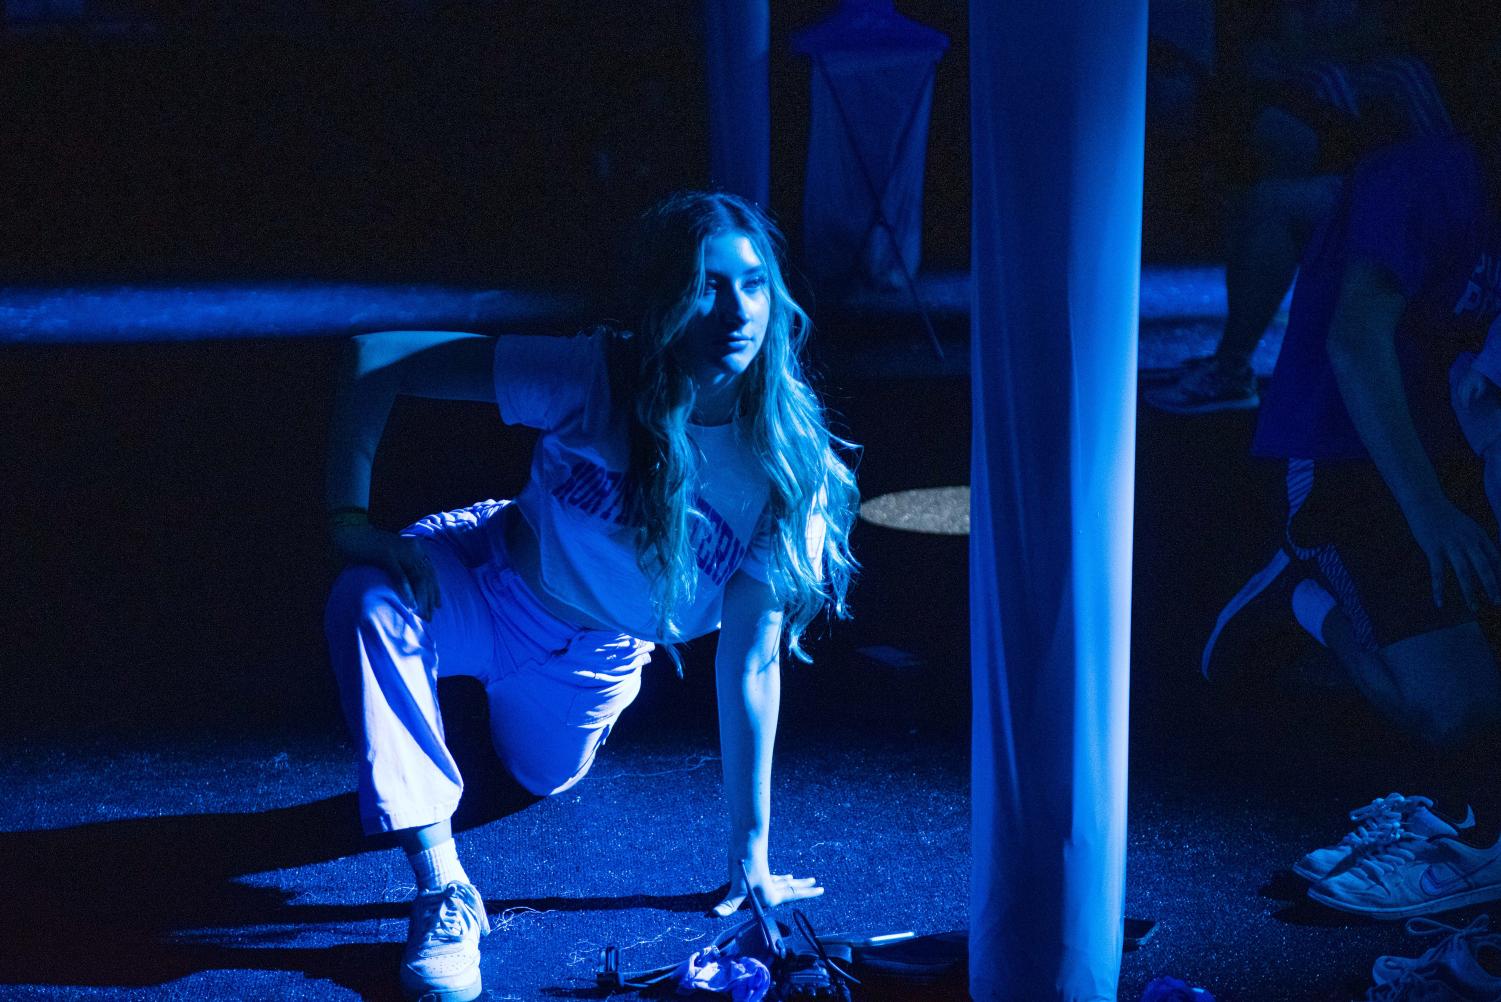 A person is stretching under the blue light.